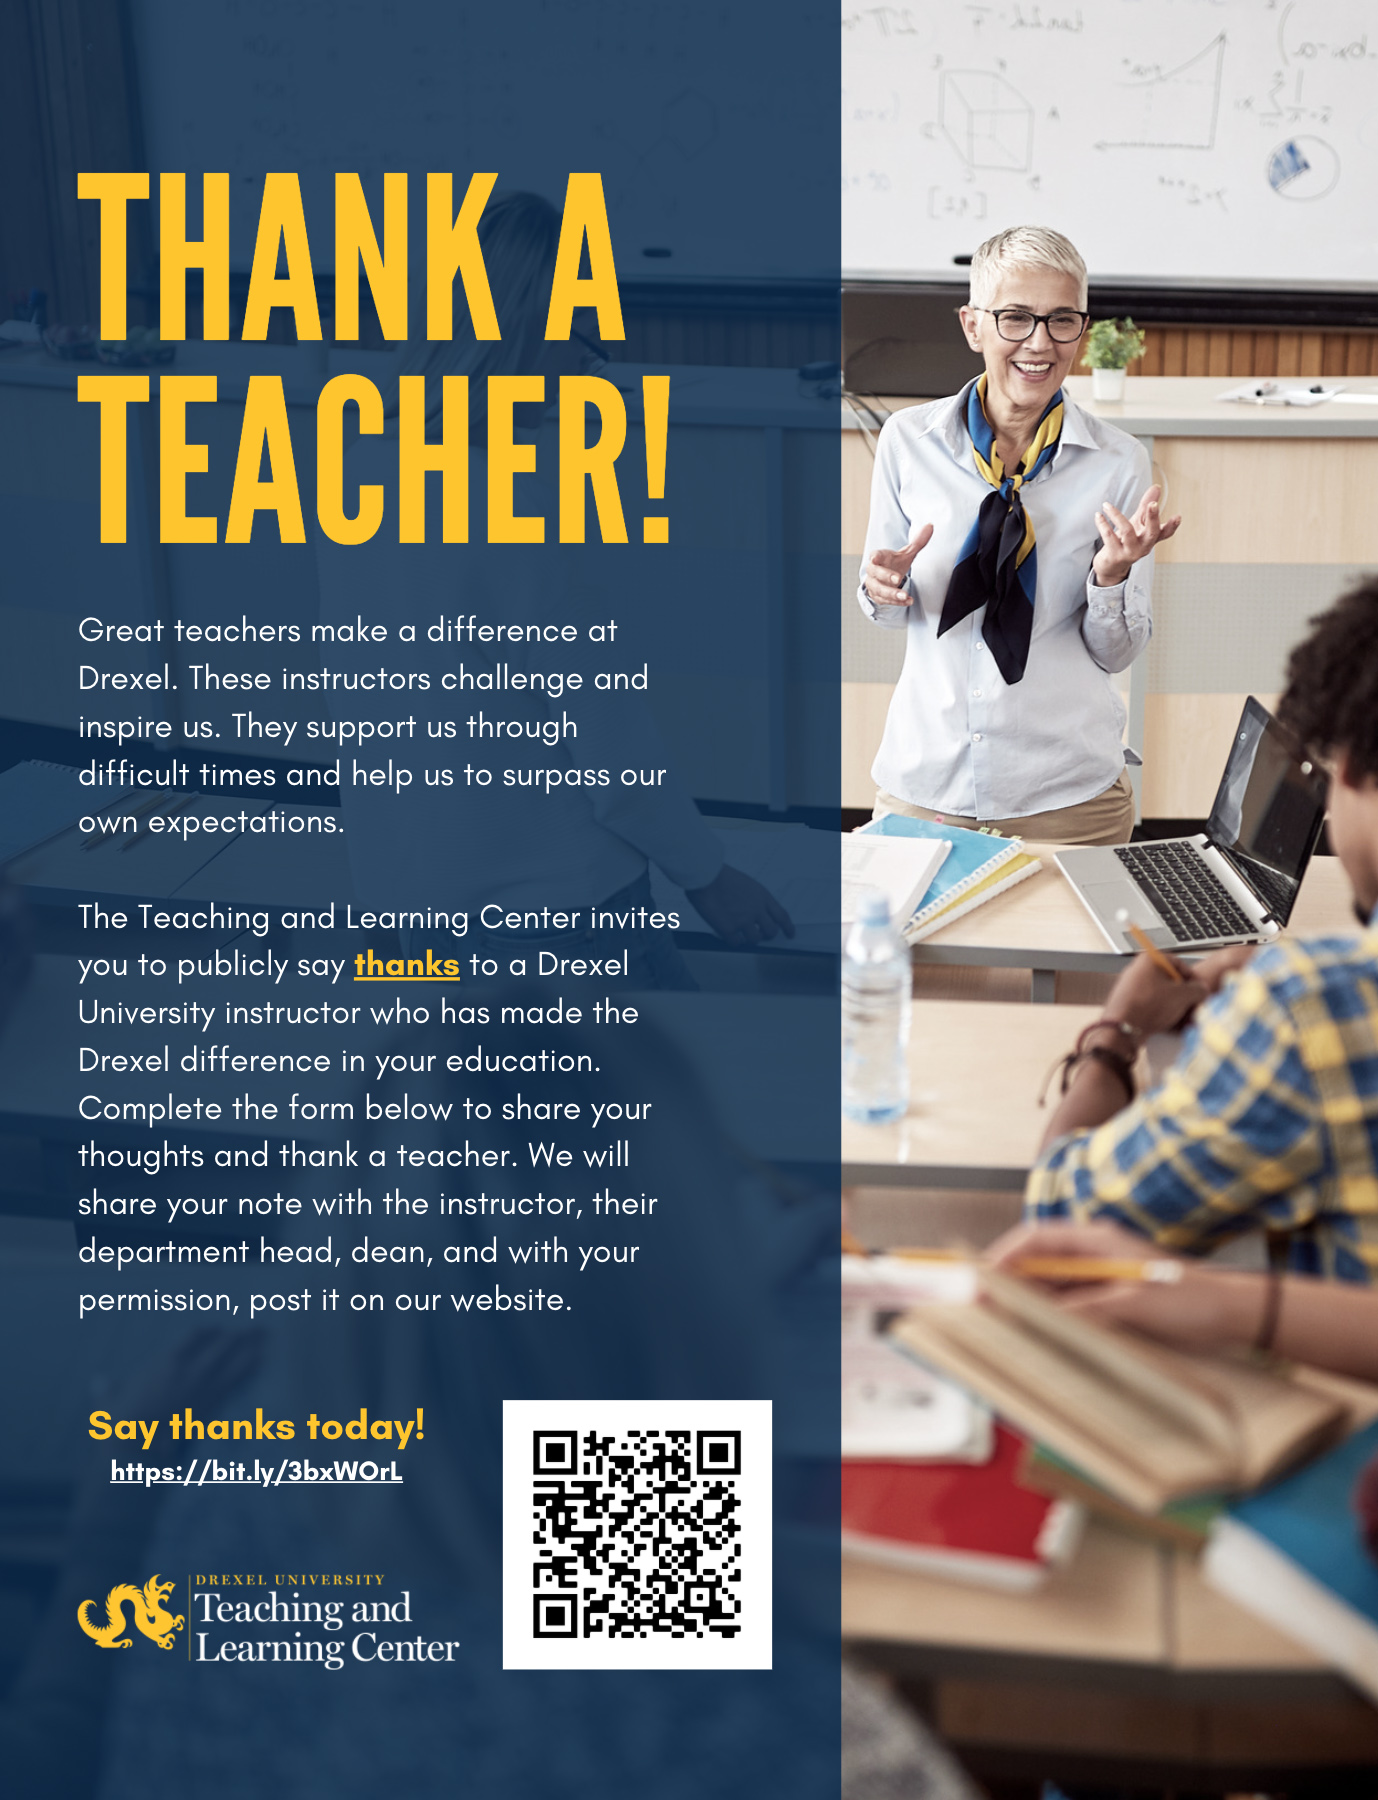 Download the Thank A Teacher flyer for distribution